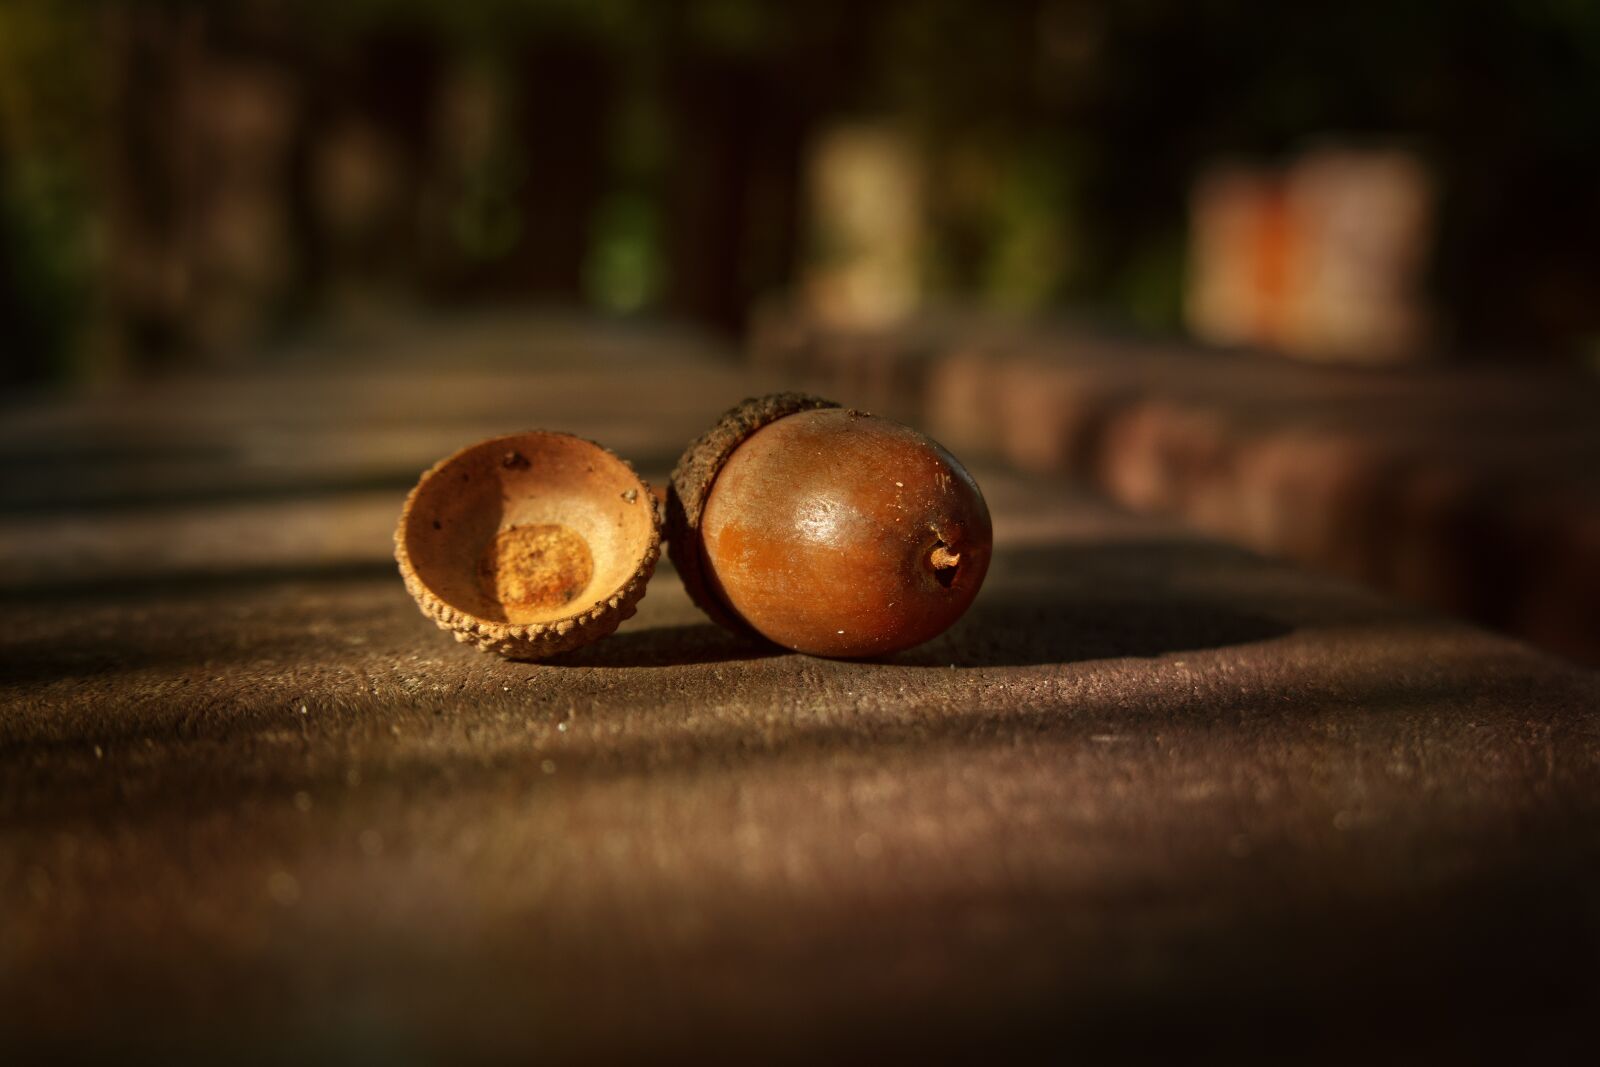 Sony Cyber-shot DSC-RX100 VI sample photo. Acorn, forest, nuts photography